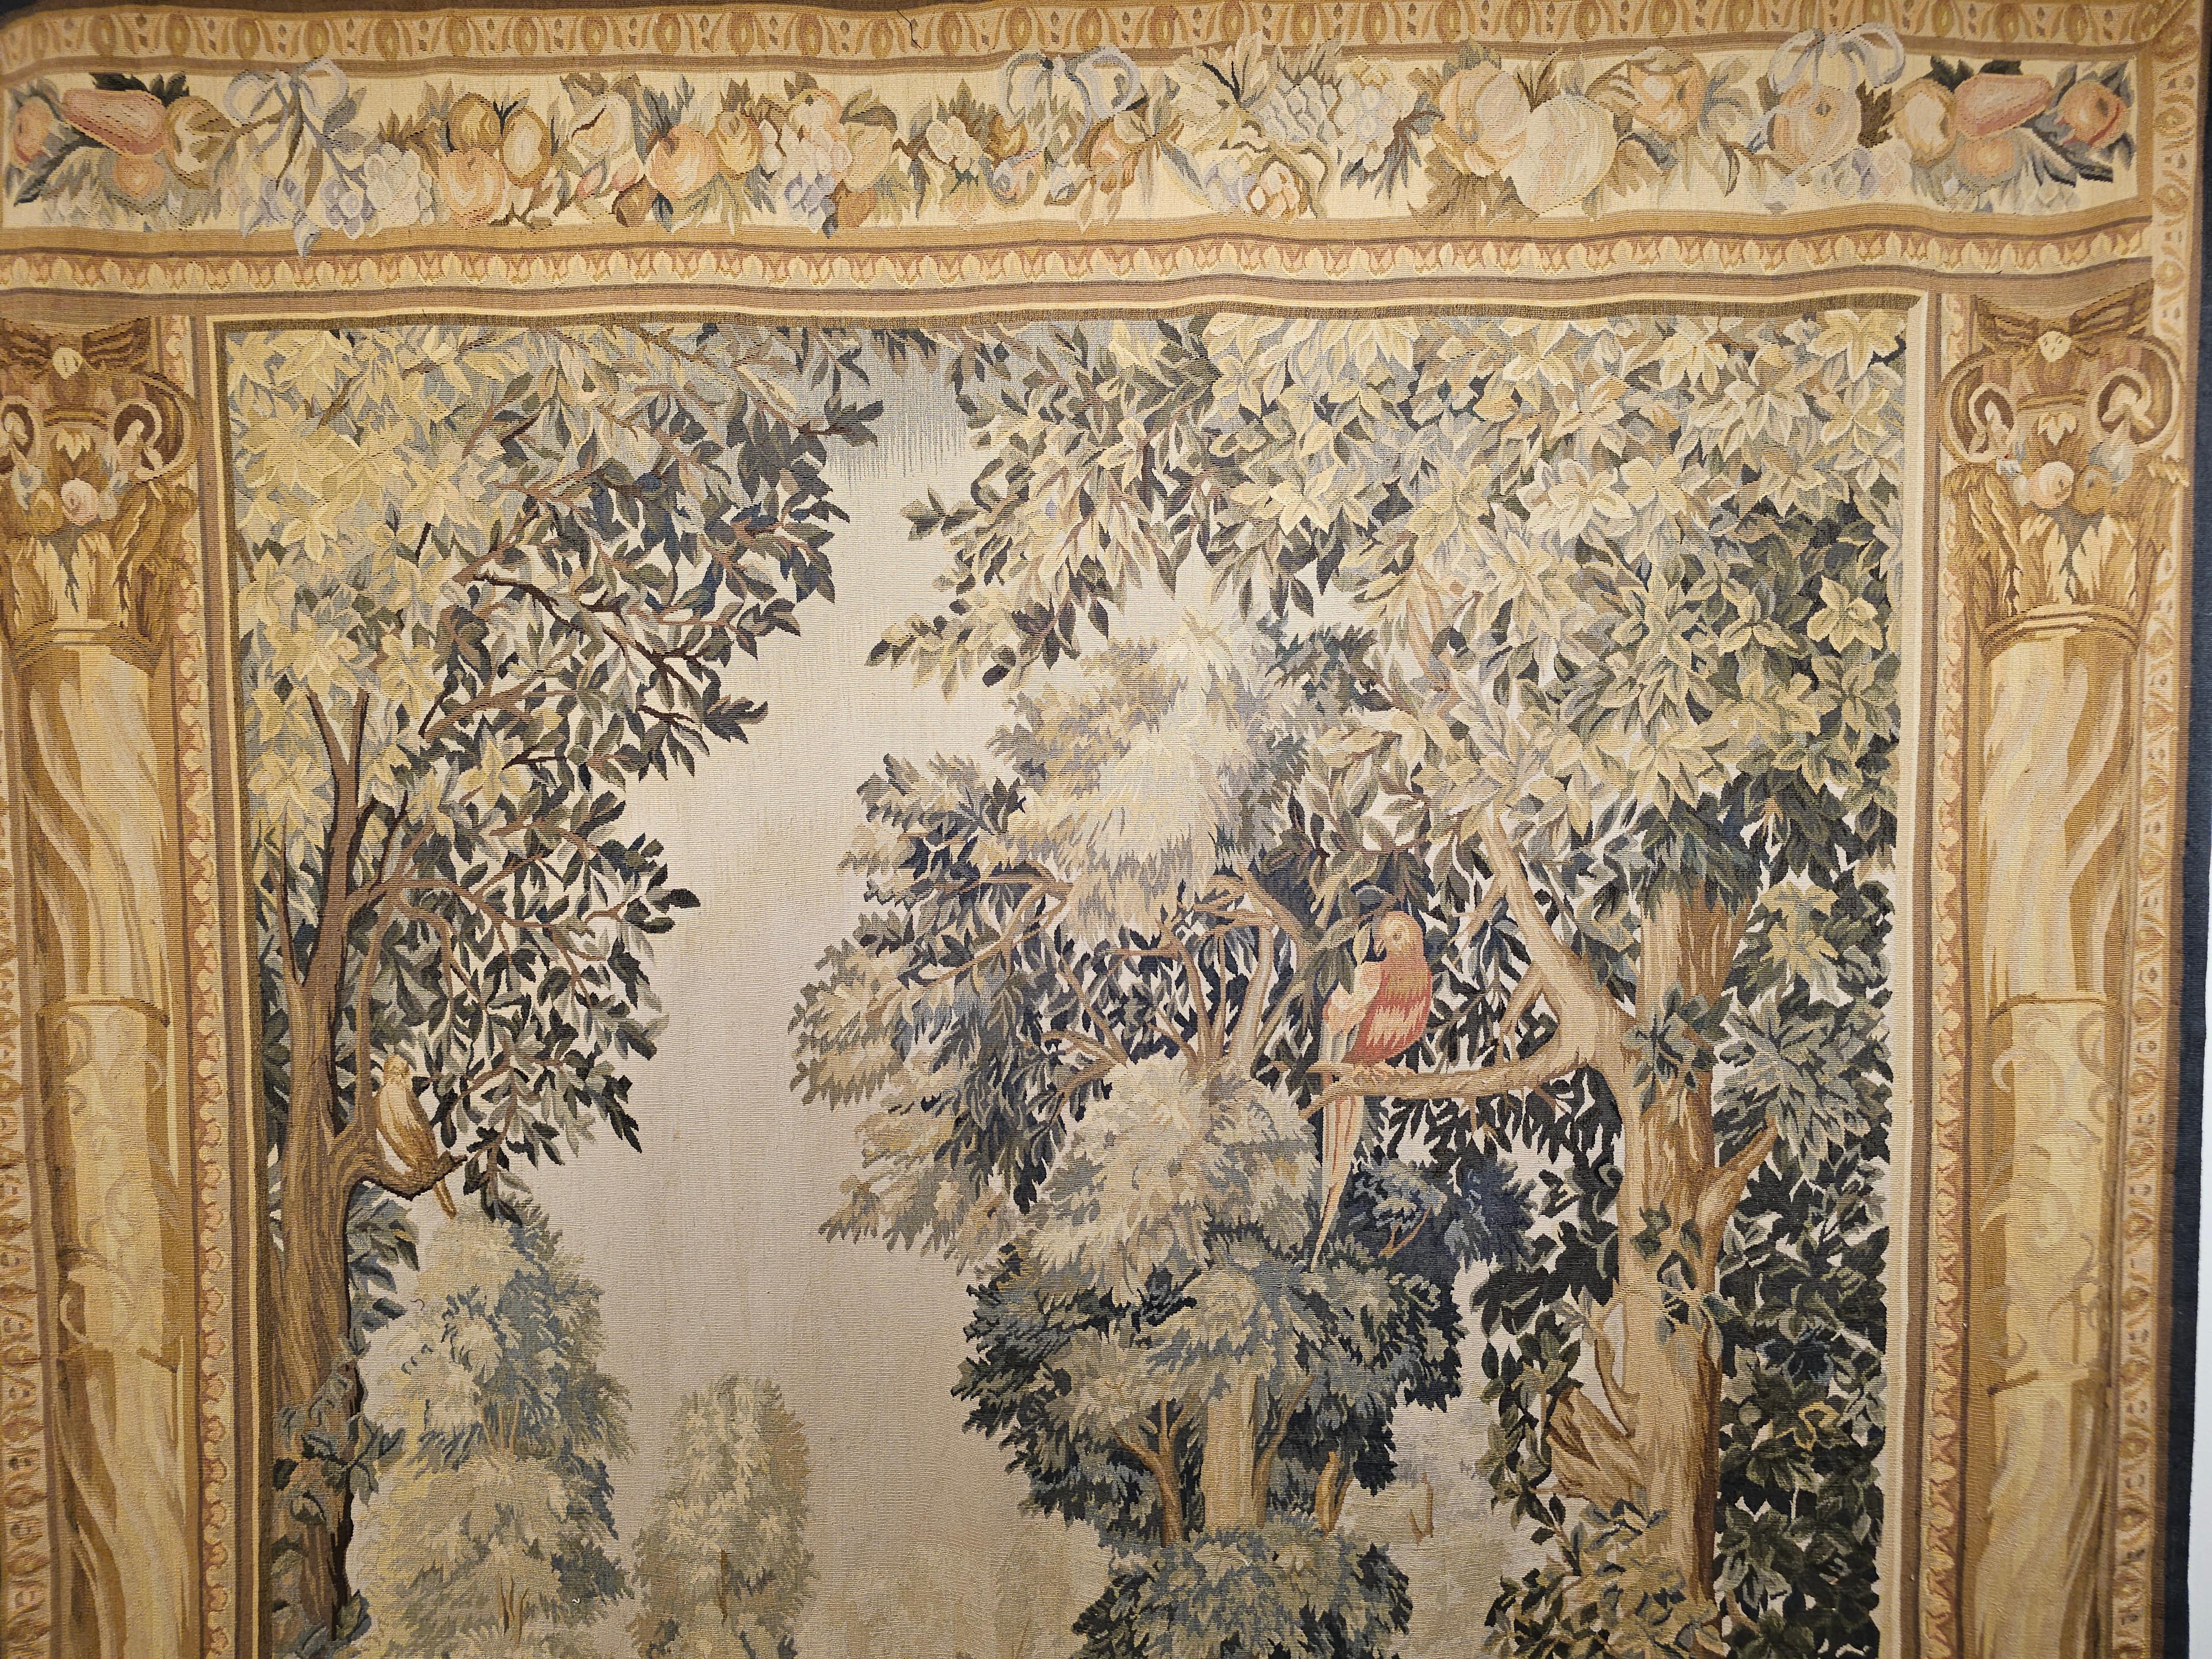 Beautiful French Aubusson Tapestry in the style of 17th century French Aubusson Verdure tapestries hand-woven in the 20th century in France.  The nature scene depicts birds on tree branches in a tranquil forest scene.  The colors include various